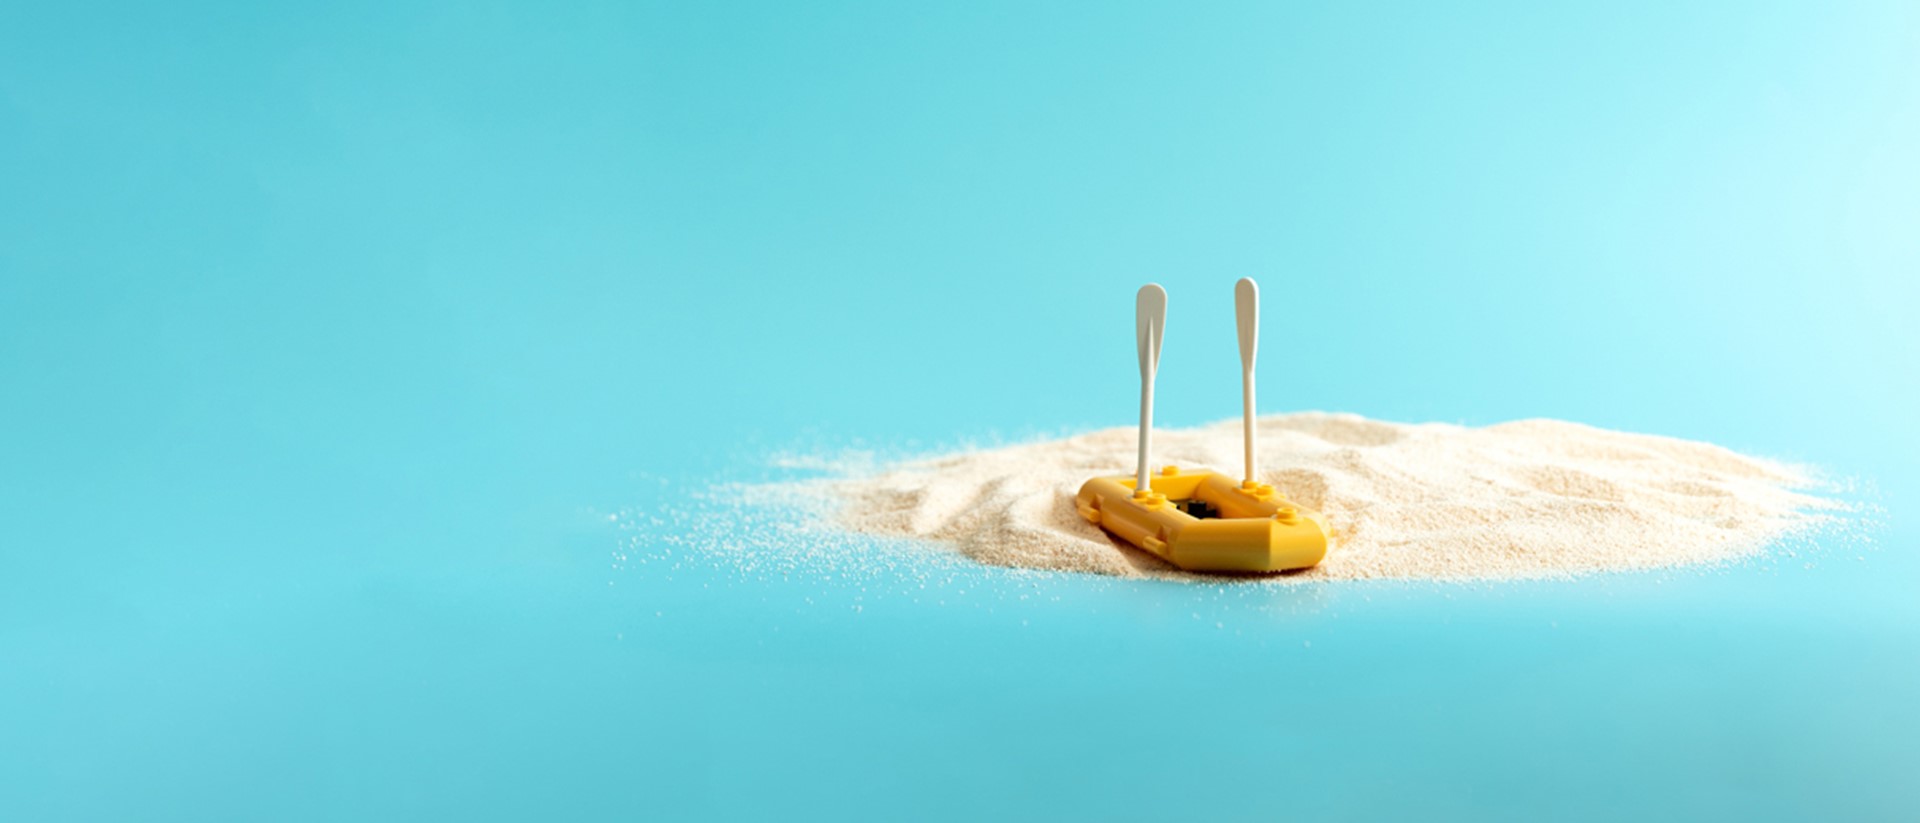 Image of a mini yellow paddle boat on sand against a blue background 